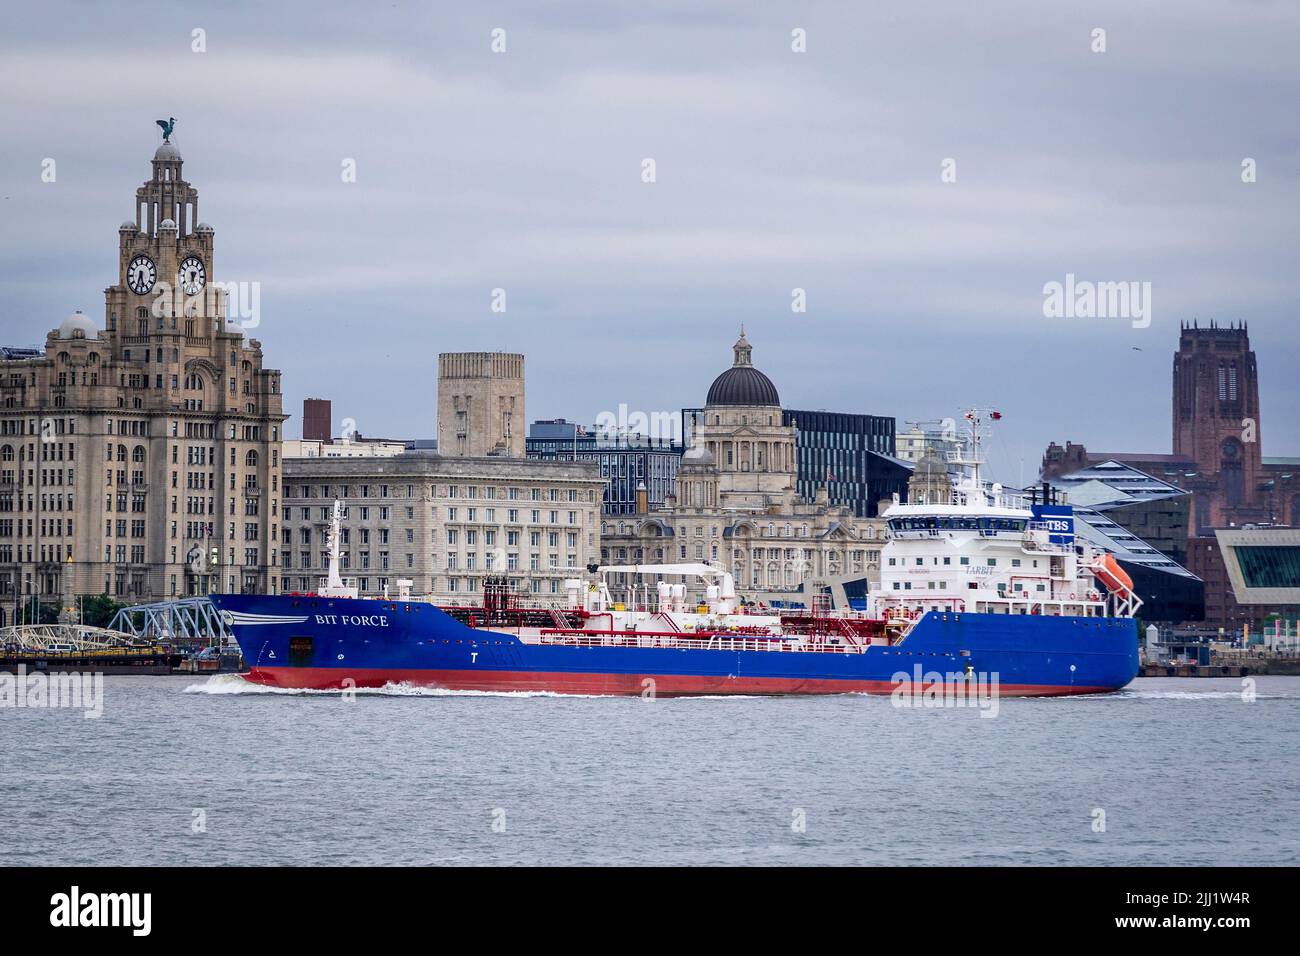 Bit Force a Bitumen Tanker built in 2003 currently sailing under the flag of Netherlands passing the famouse Liverpool waterfront. Stock Photo